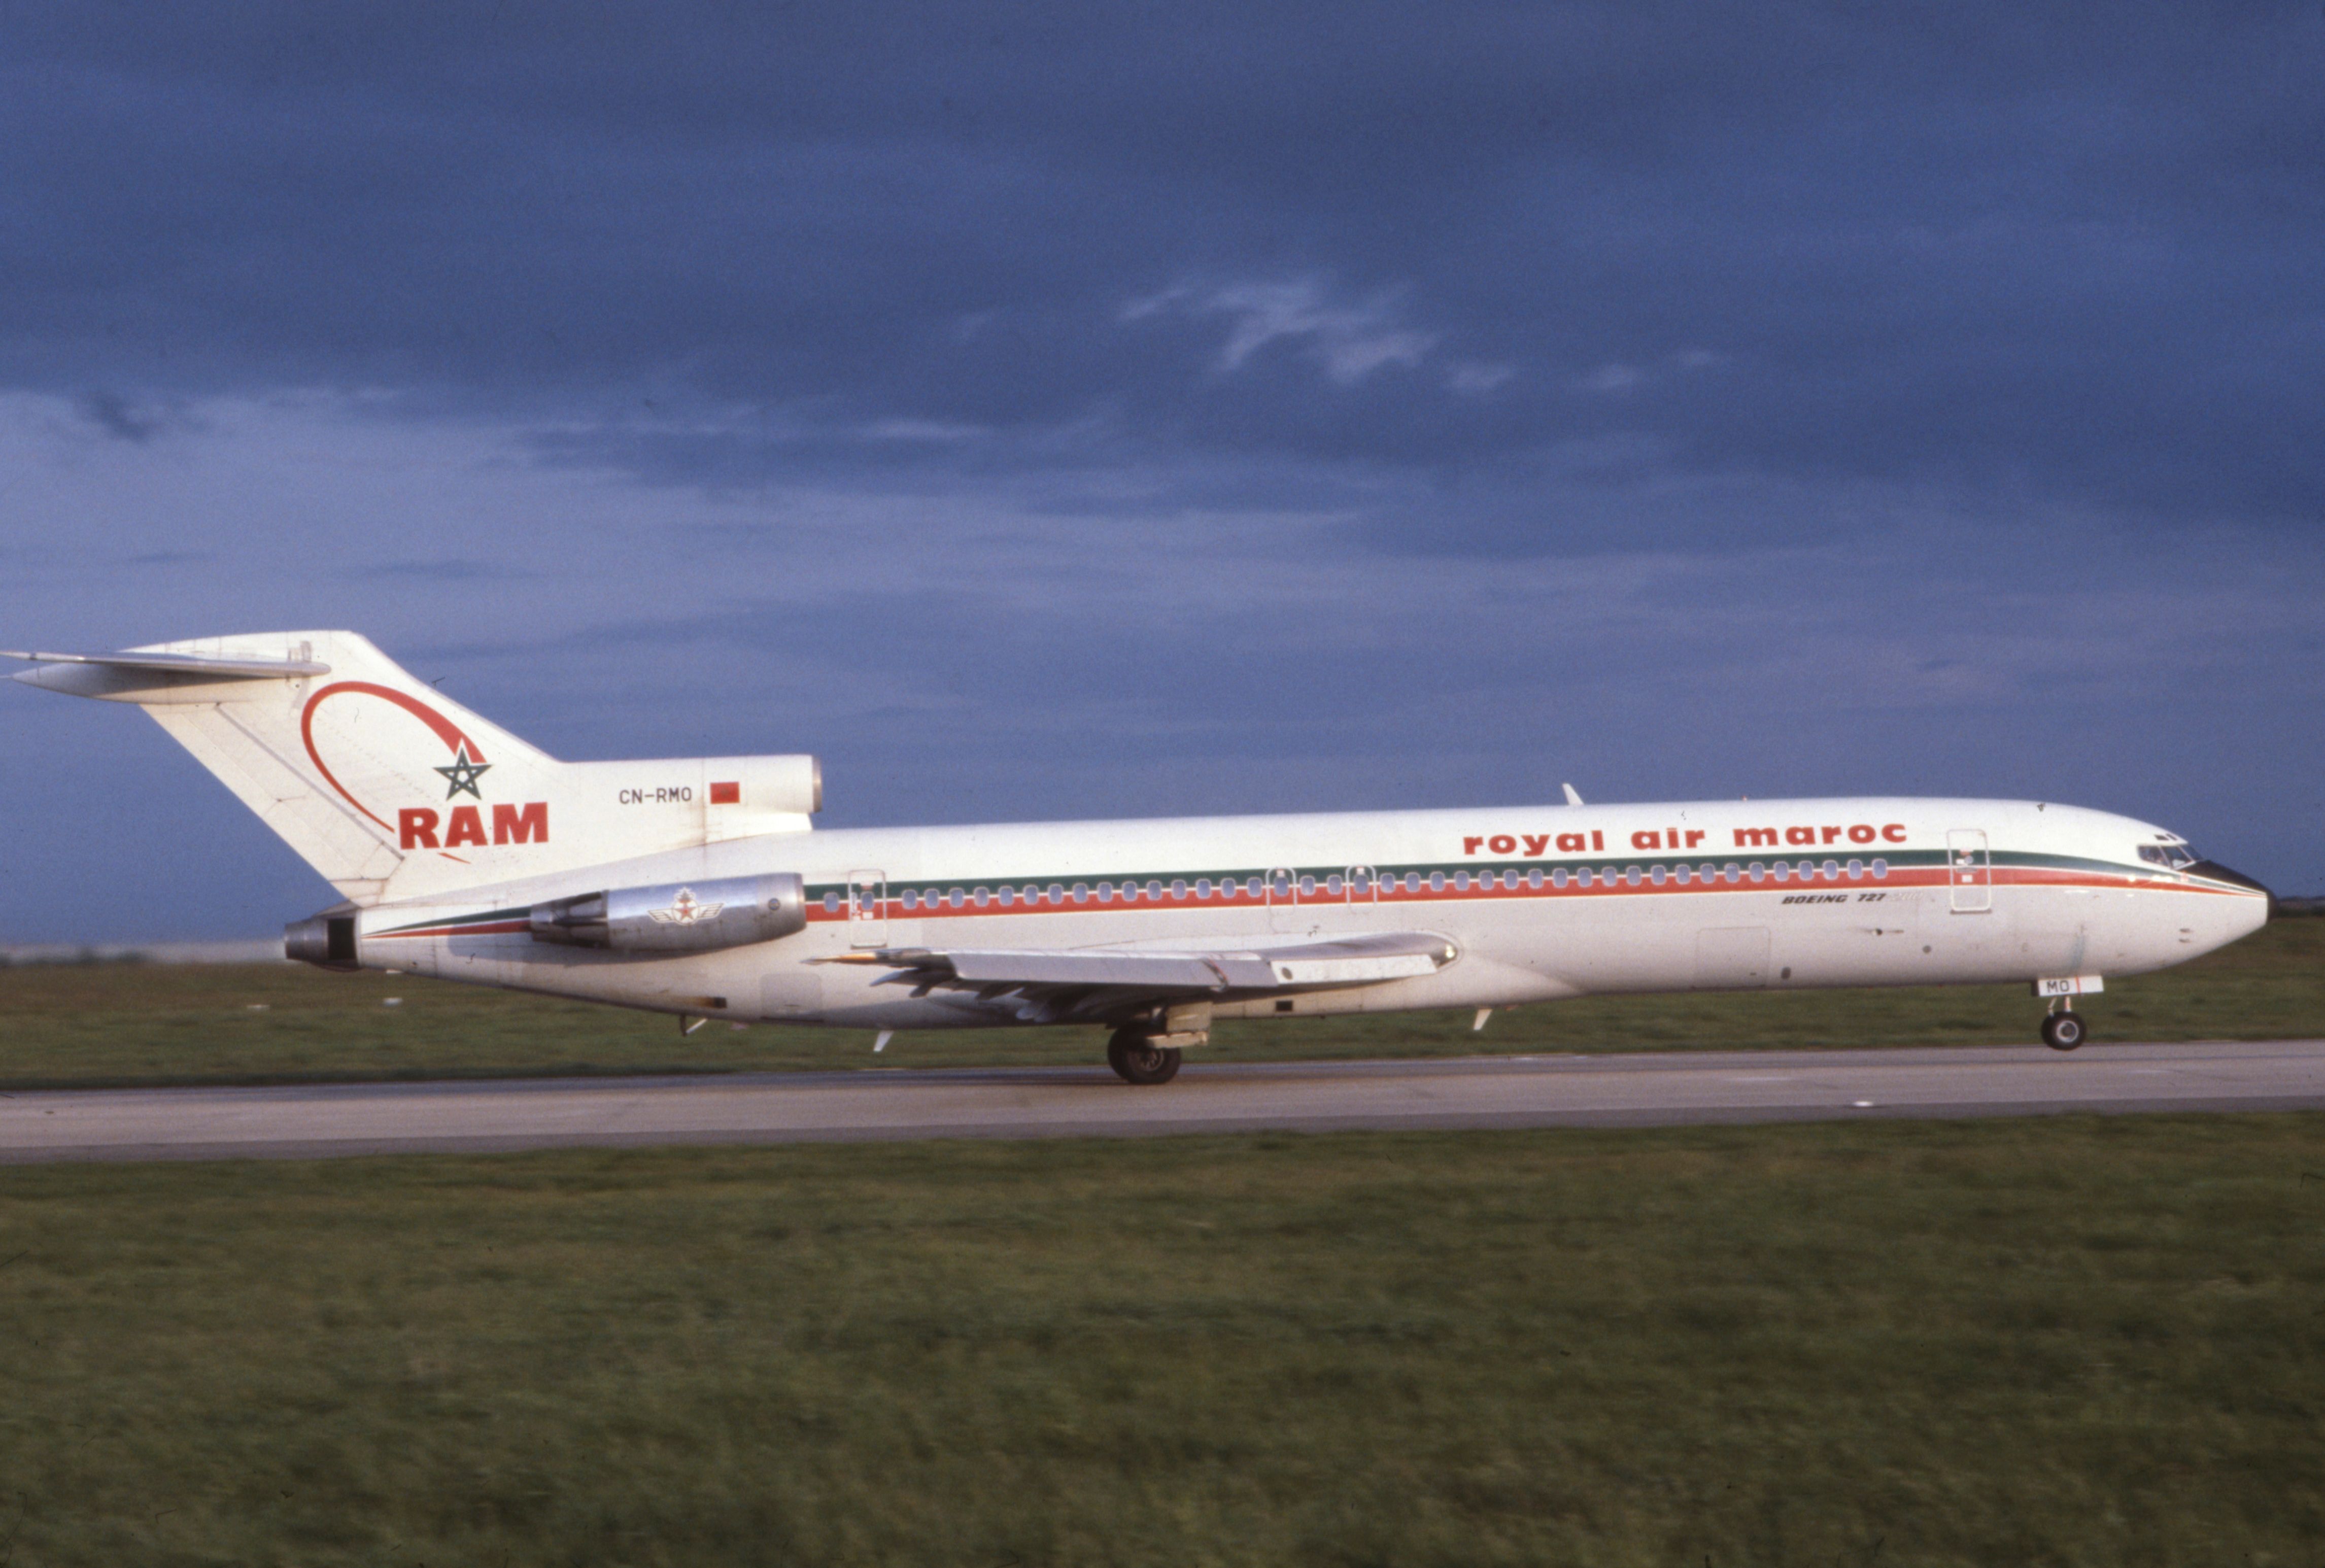 GettyImages-1142198190 Royal Air Maroc Boeing 727